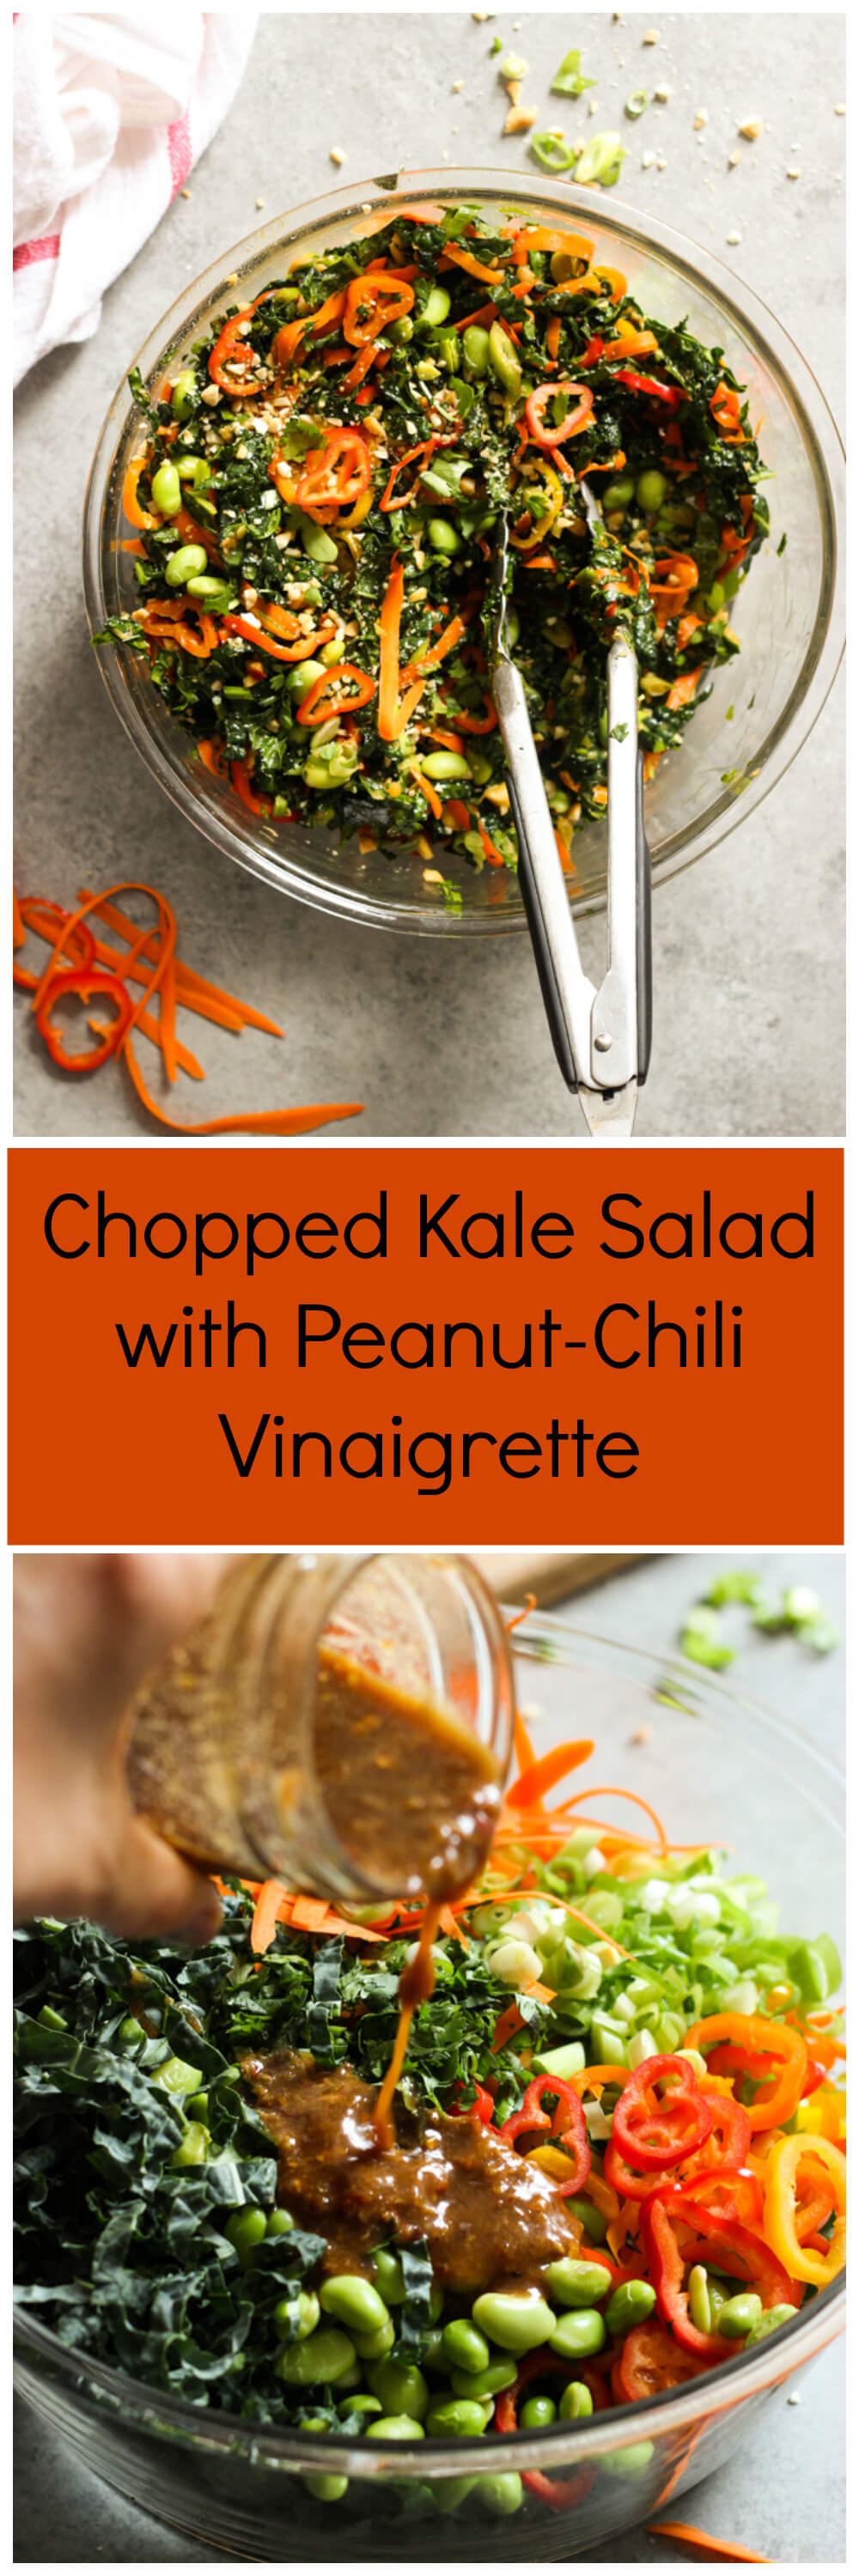 Chopped Kale Salad with Peanut-Chili Vinaigrette - kale, sweet peppers, cilantro, cashews, and edamame tossed in the most flavorful peanut-chili vinaigrette | littlebroken.com @littlebroken